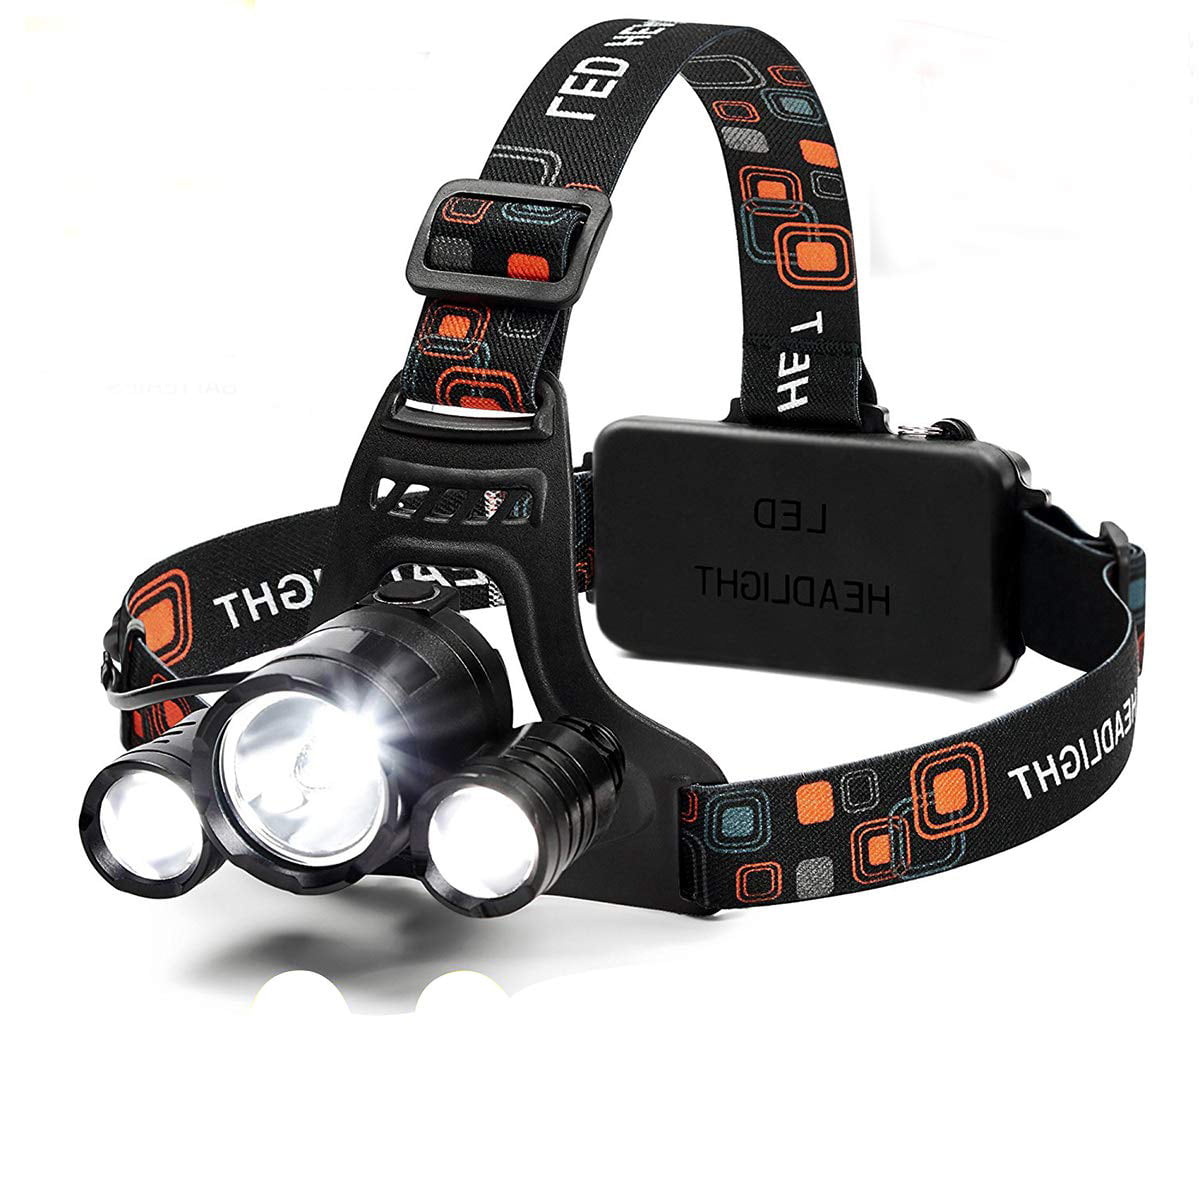 Adjustable Headband PandaLily LED Headlamp Night Fishing 11-LED Cap Light Headlight Headlamp Flashlight Head Hat Clip Lamp Perfect for Runners Lightweight Waterproof 